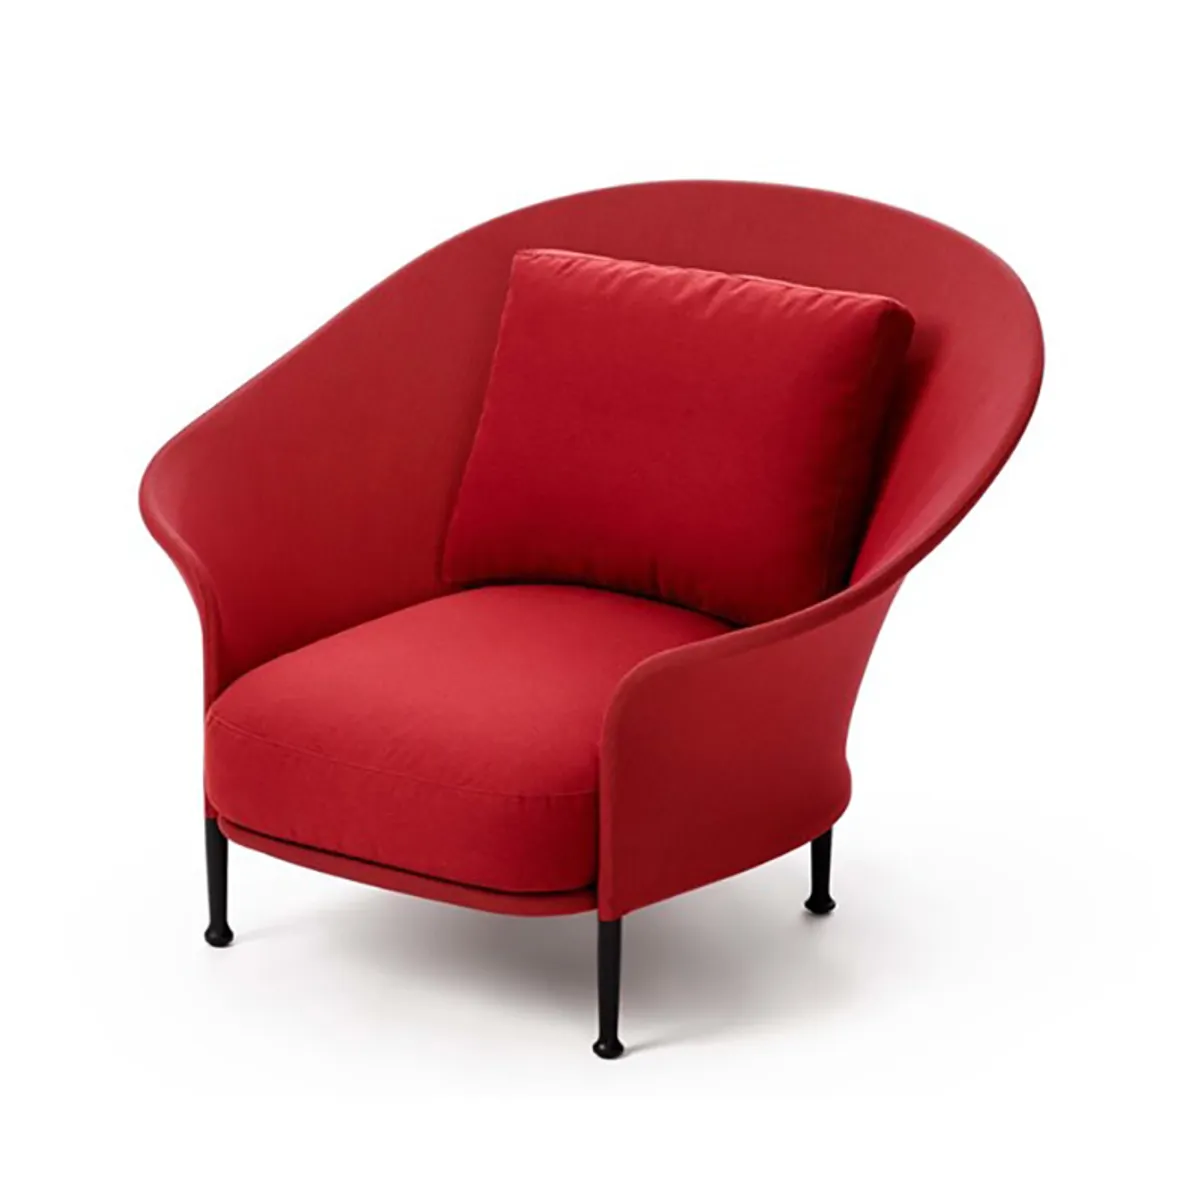 Liz Armchair With Red Upholstery